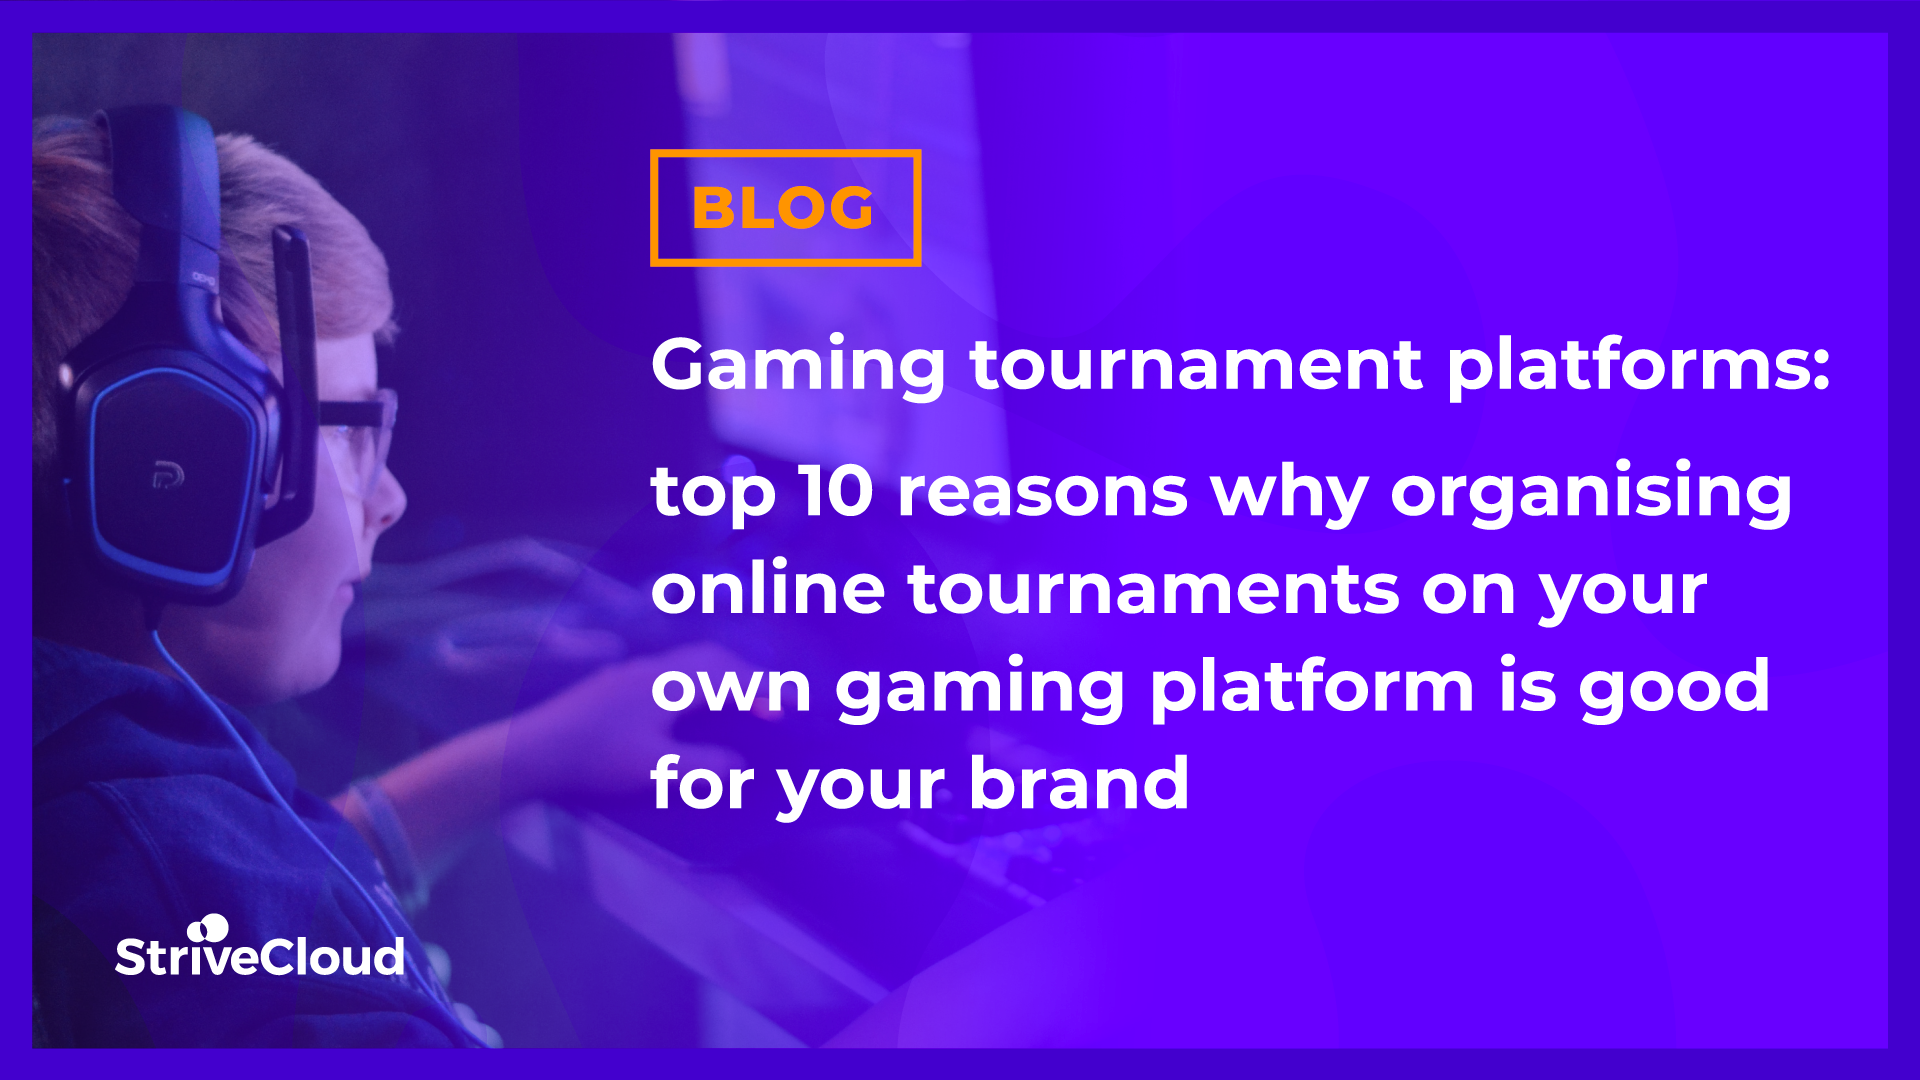 Gaming tournament platforms: top 10 reasons why organising online tournaments on your own gaming platform is good for your brand